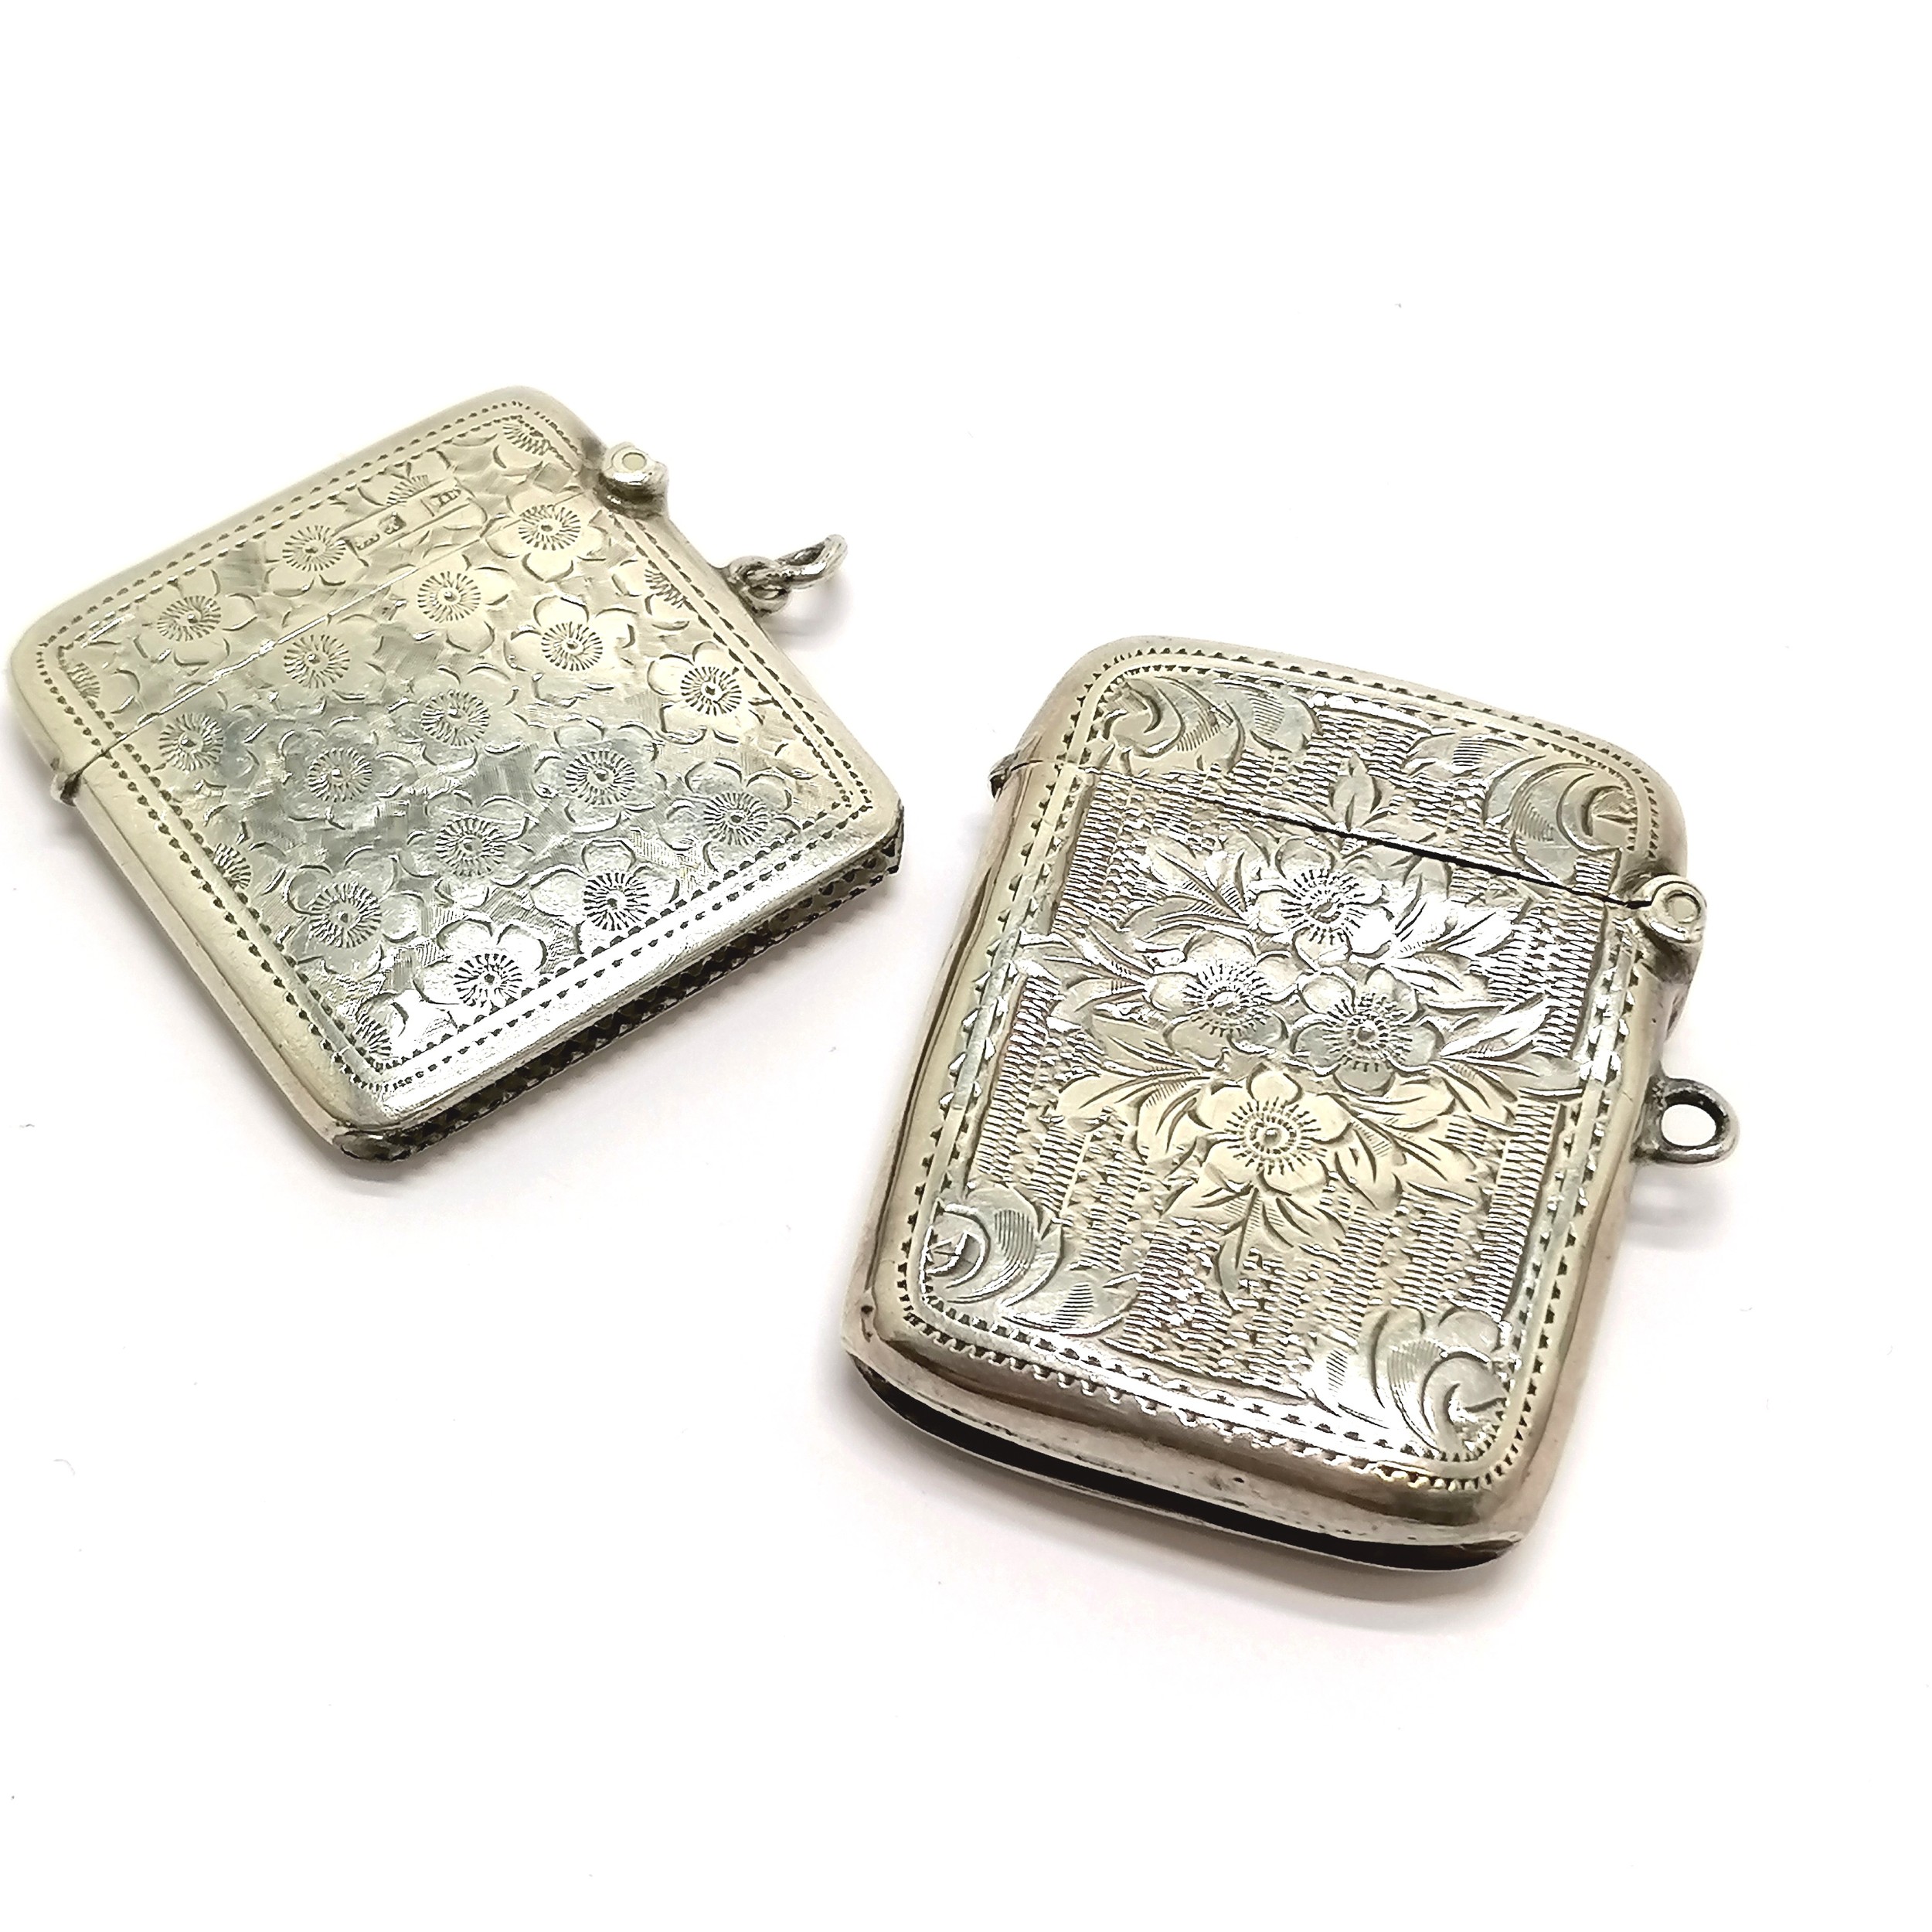 2 x antique silver vestas inc 1910 Chester by Walker & Hall (3.8cm x 4.2cm) - both have engraved - Image 2 of 2